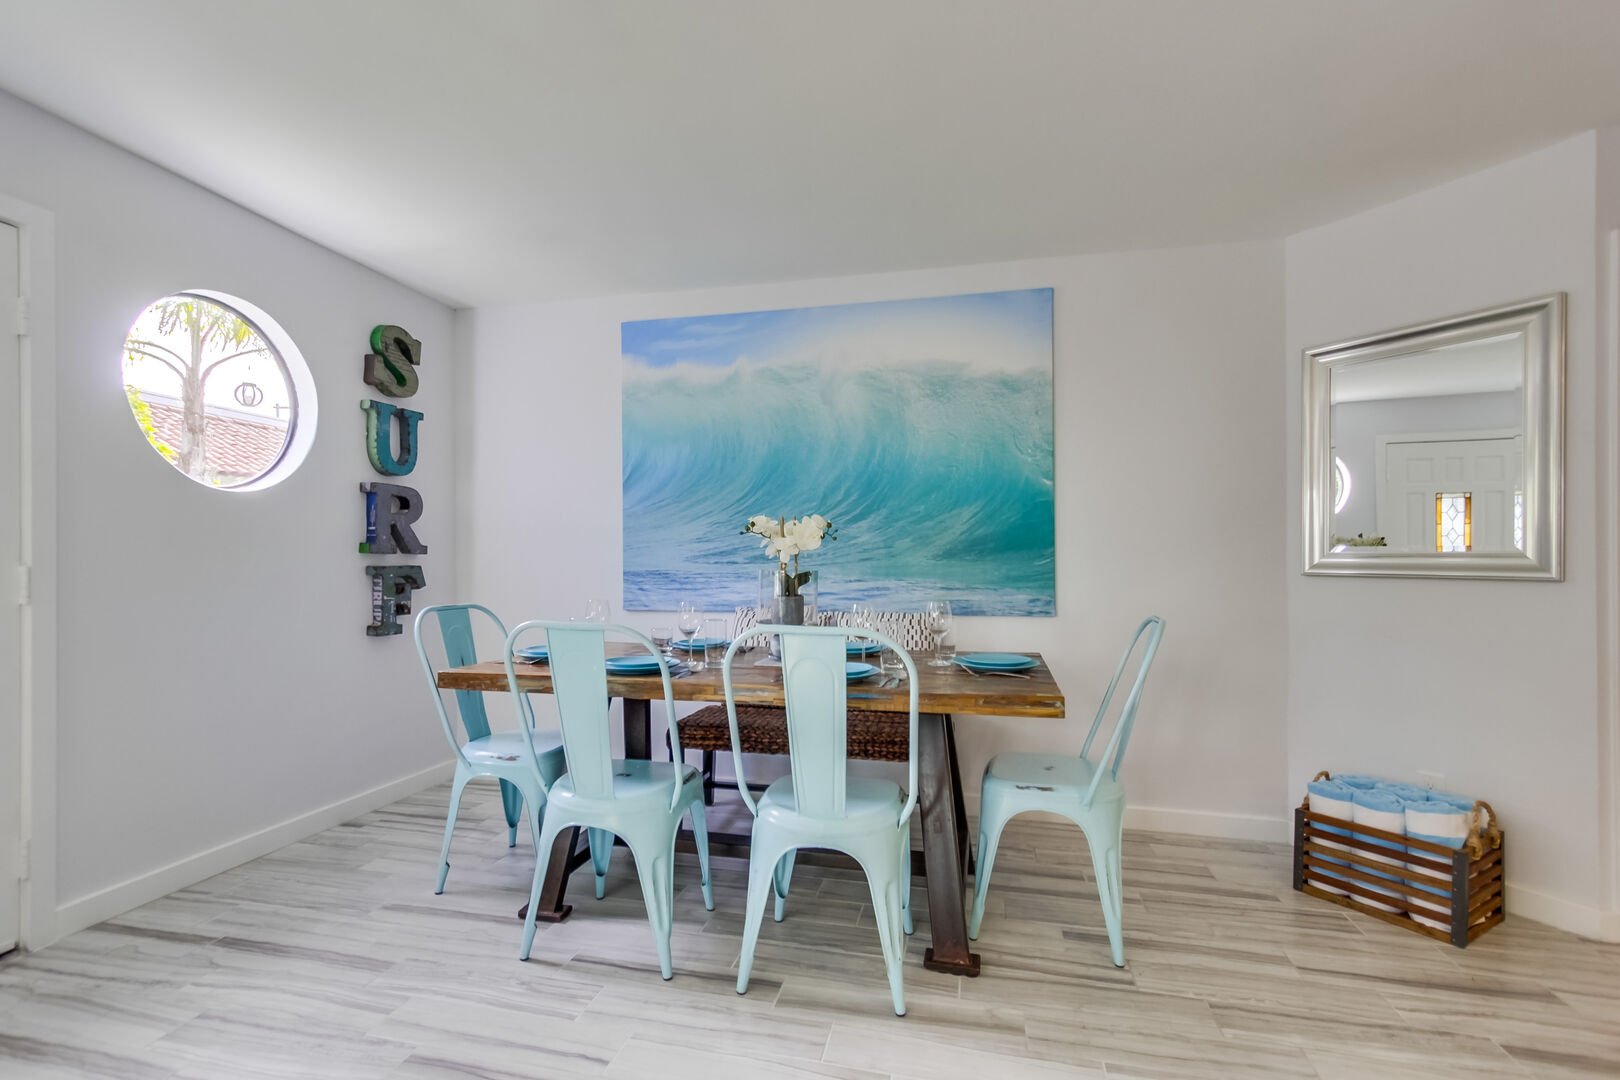 Dining area for 6 with beachy decor and mirror